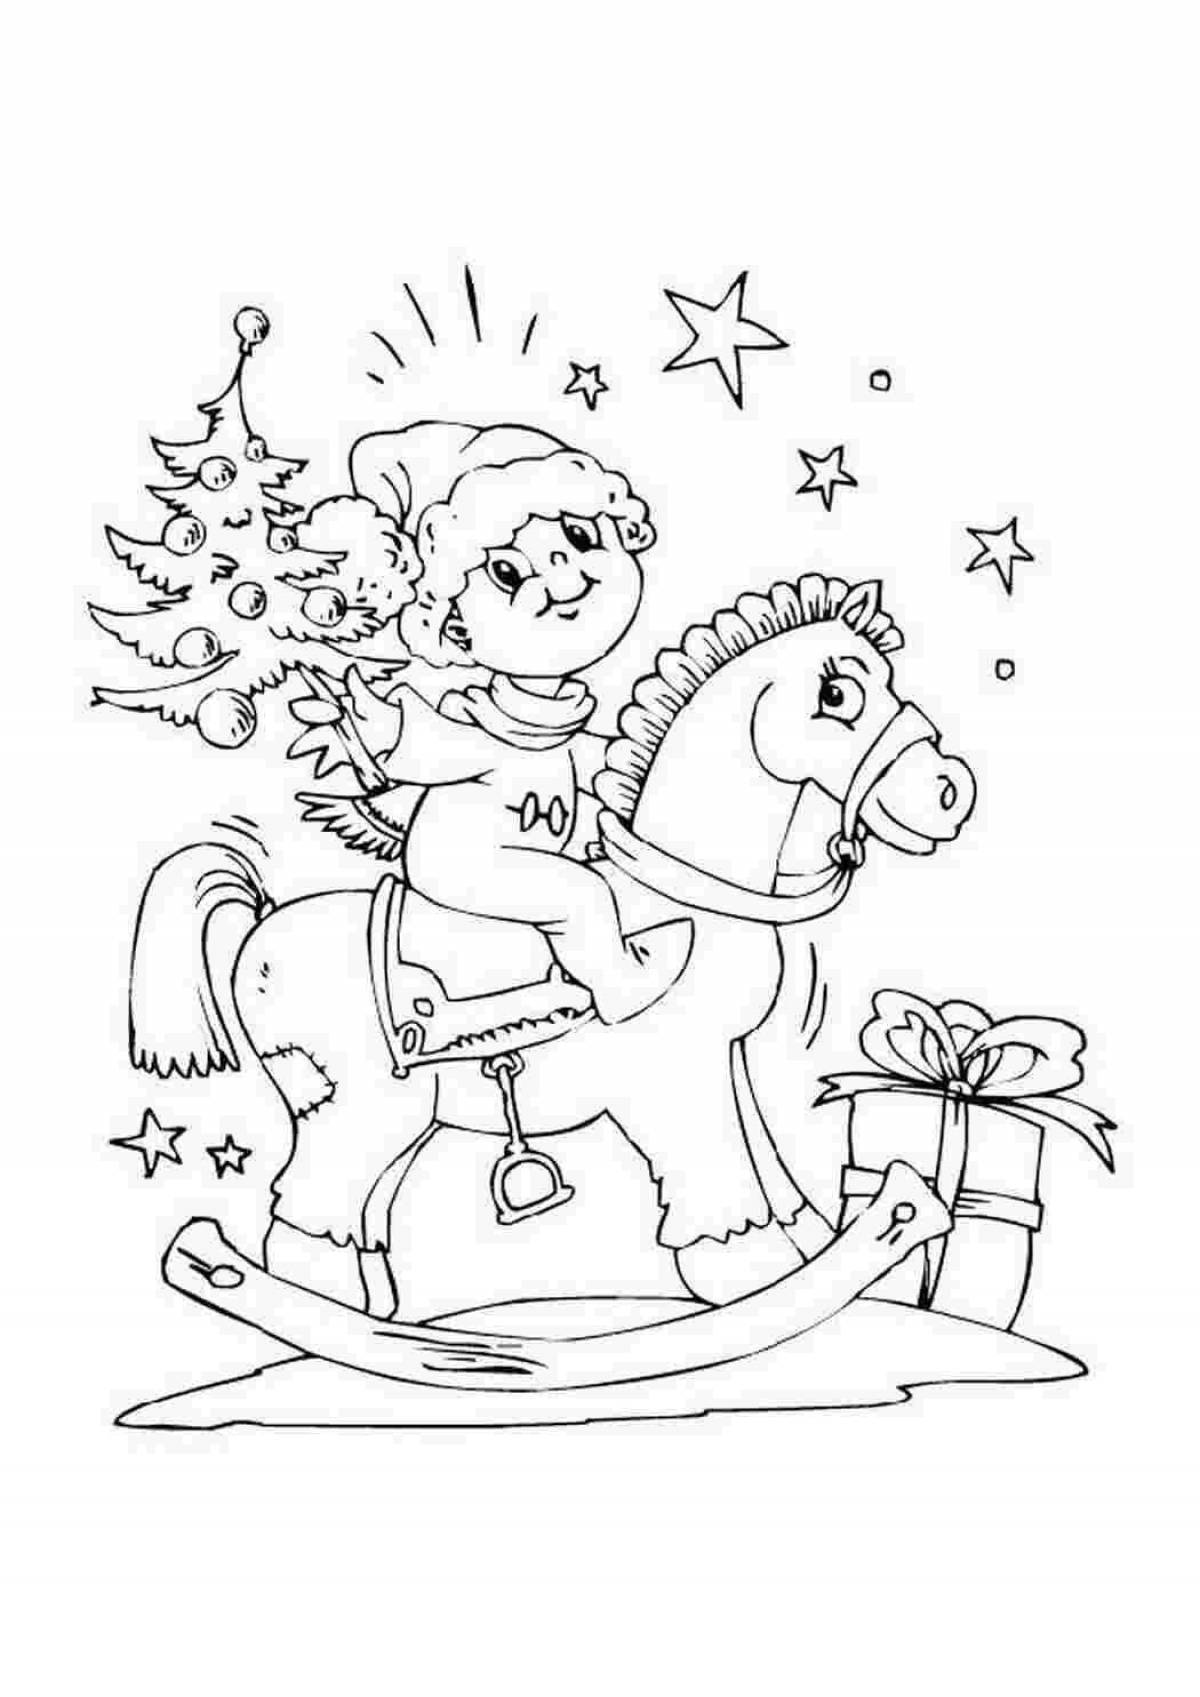 Coloring page beautiful winter horses